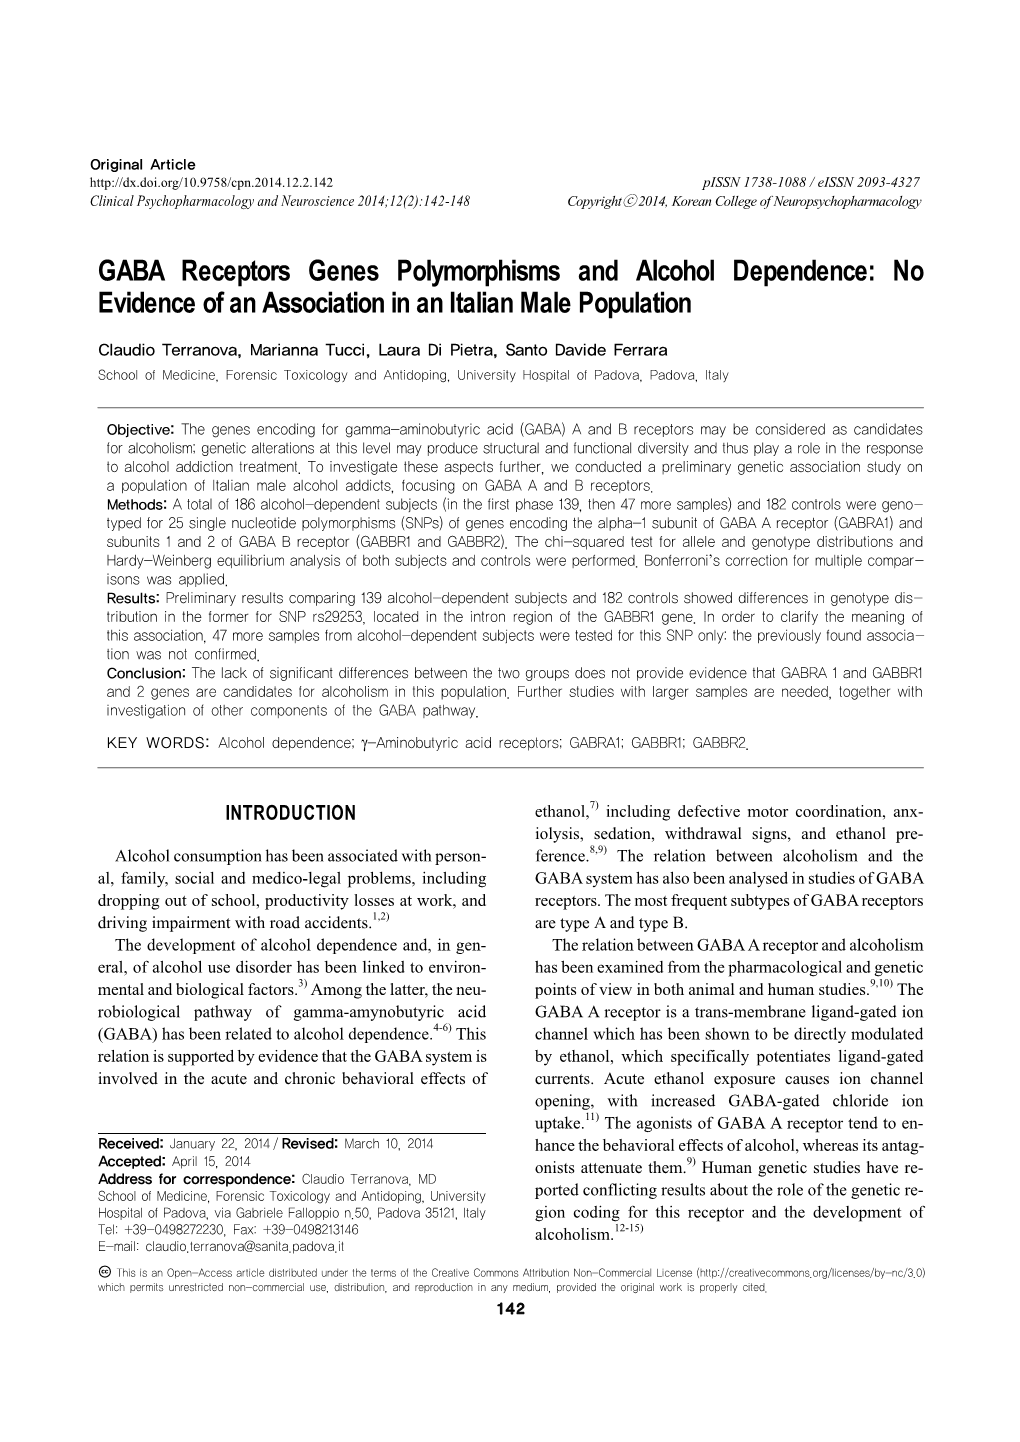 GABA Receptors Genes Polymorphisms and Alcohol Dependence: No Evidence of an Association in an Italian Male Population